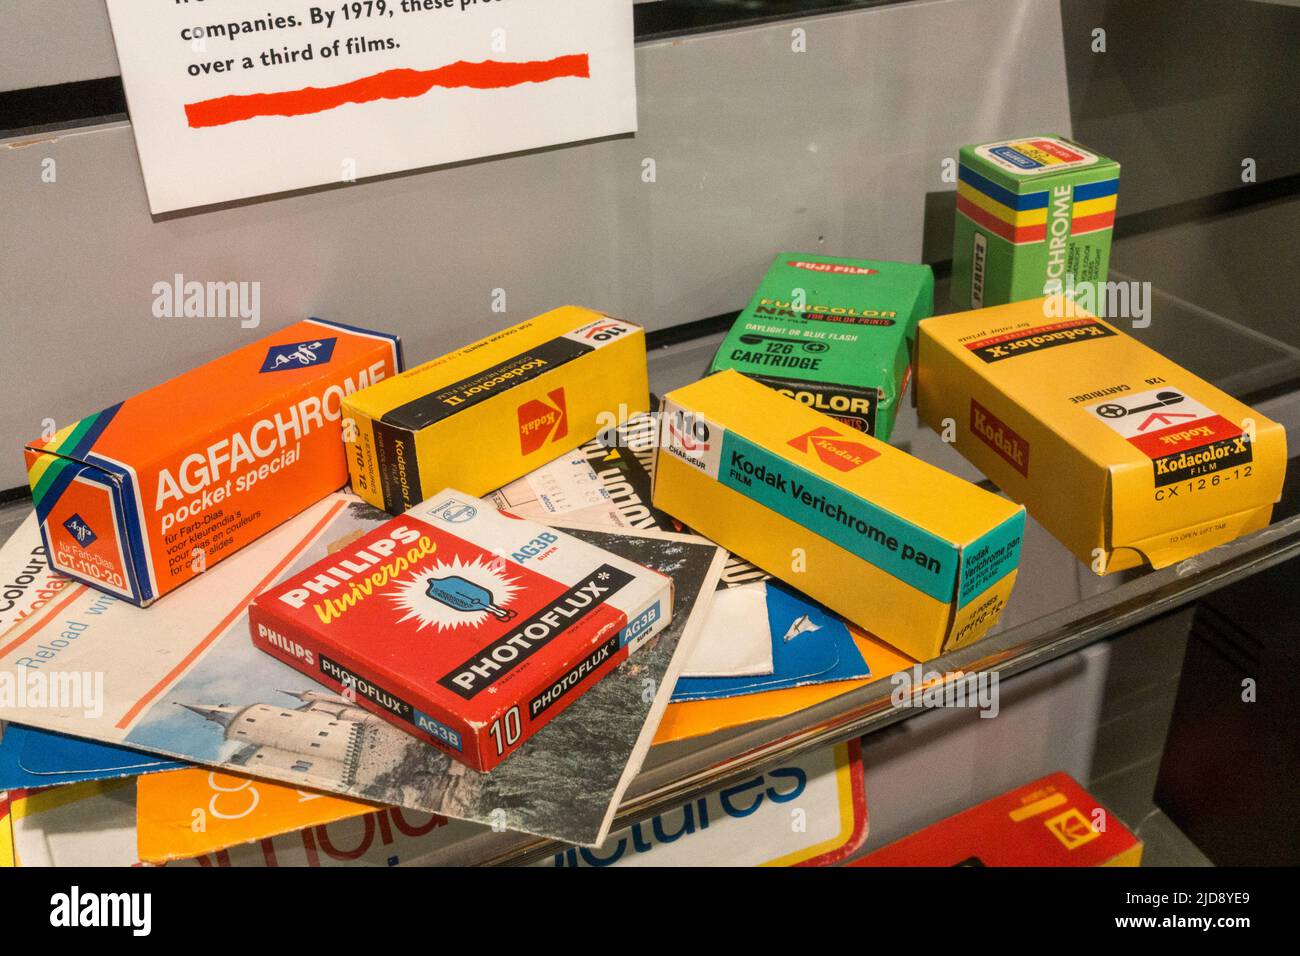 Selection of vintage film sizes from pocket film cameras (110, 126 cartridge, slide film) on display in a media museum. Stock Photo